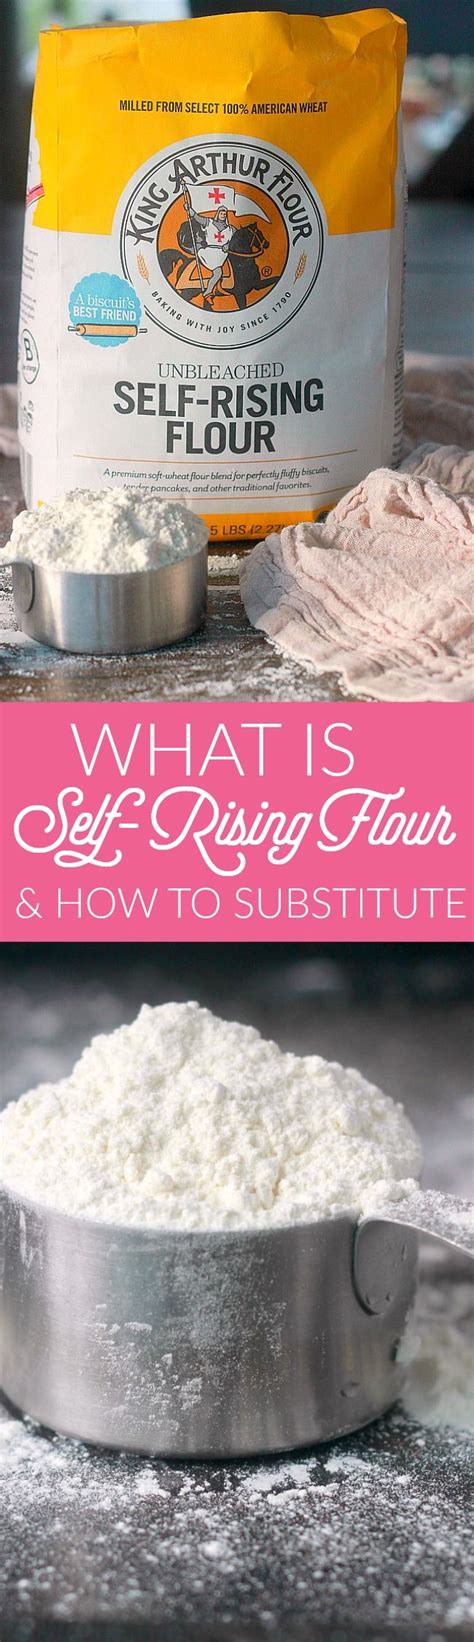 The baking powder absorbs moisture from the air, which reacts with other ingredients in the flour, affecting its ability to rise. Self-Rising Flour Substitute | Recipe | Self rising flour, Food substitutions, Baking basics